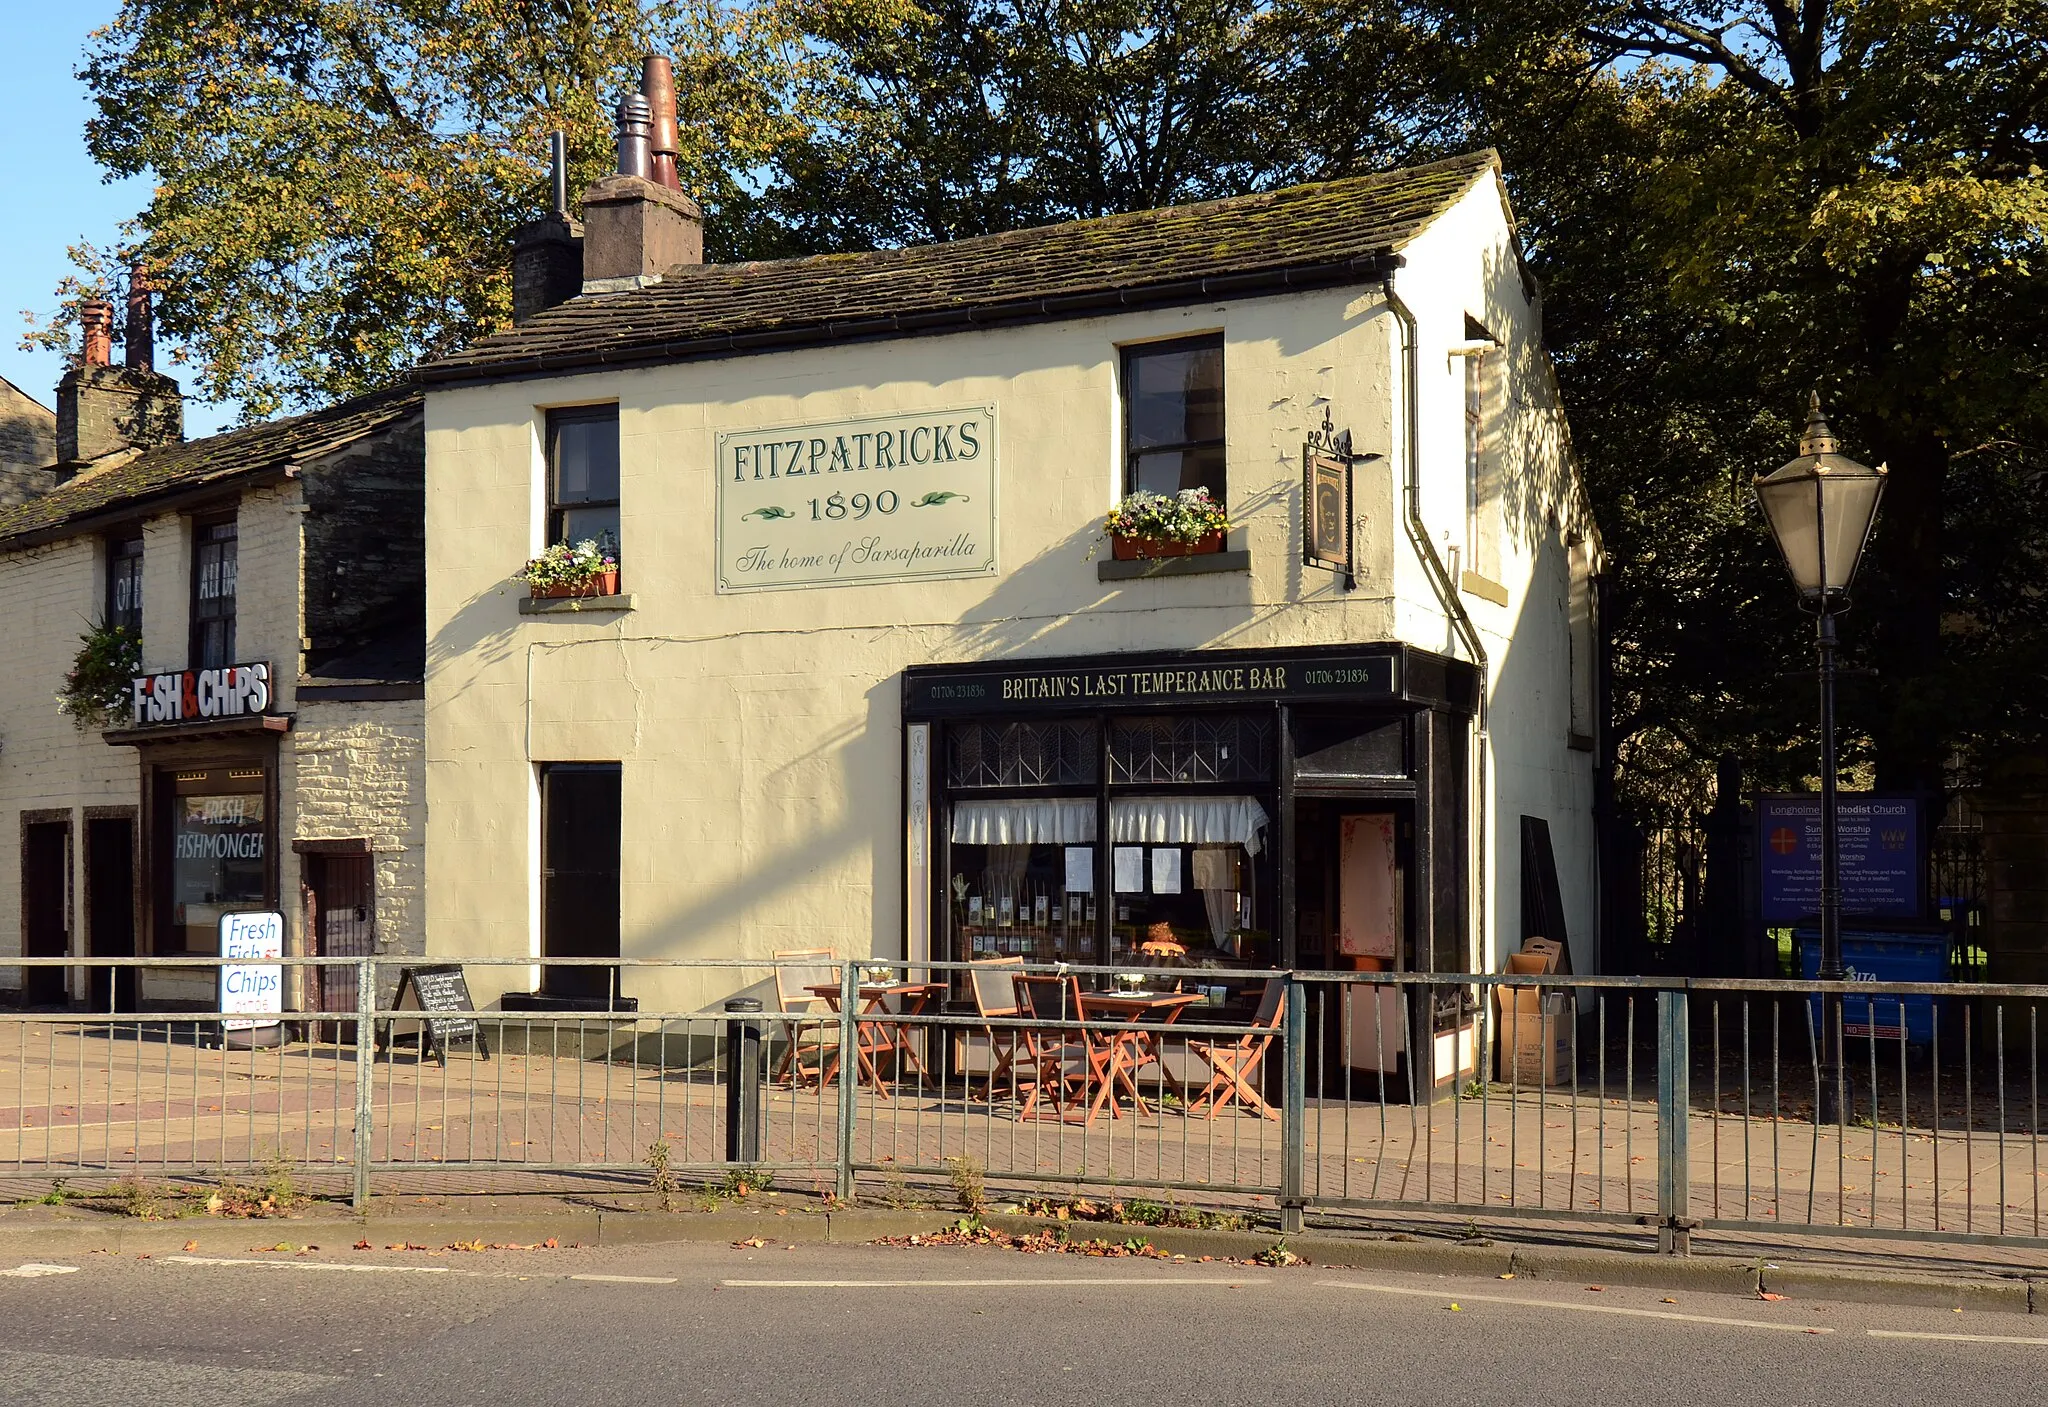 Photo showing: Fitzpatrick’s is the last original temperance bar is located in the town of Rawtenstall, Lancashire, England.